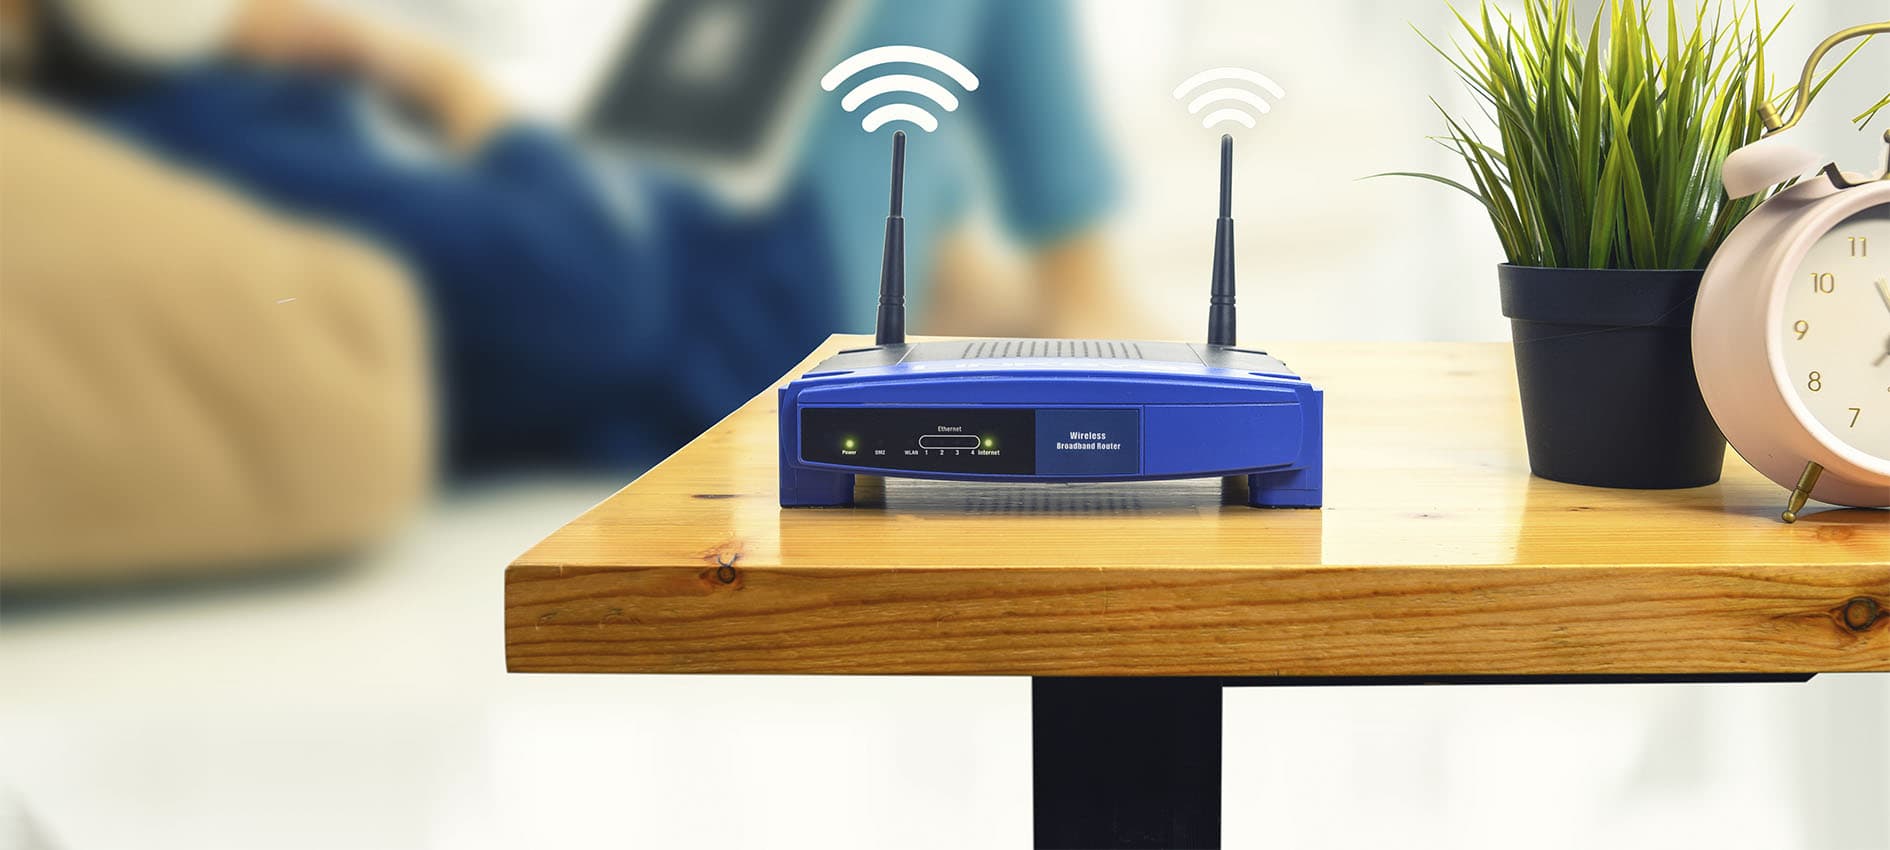 Check your router